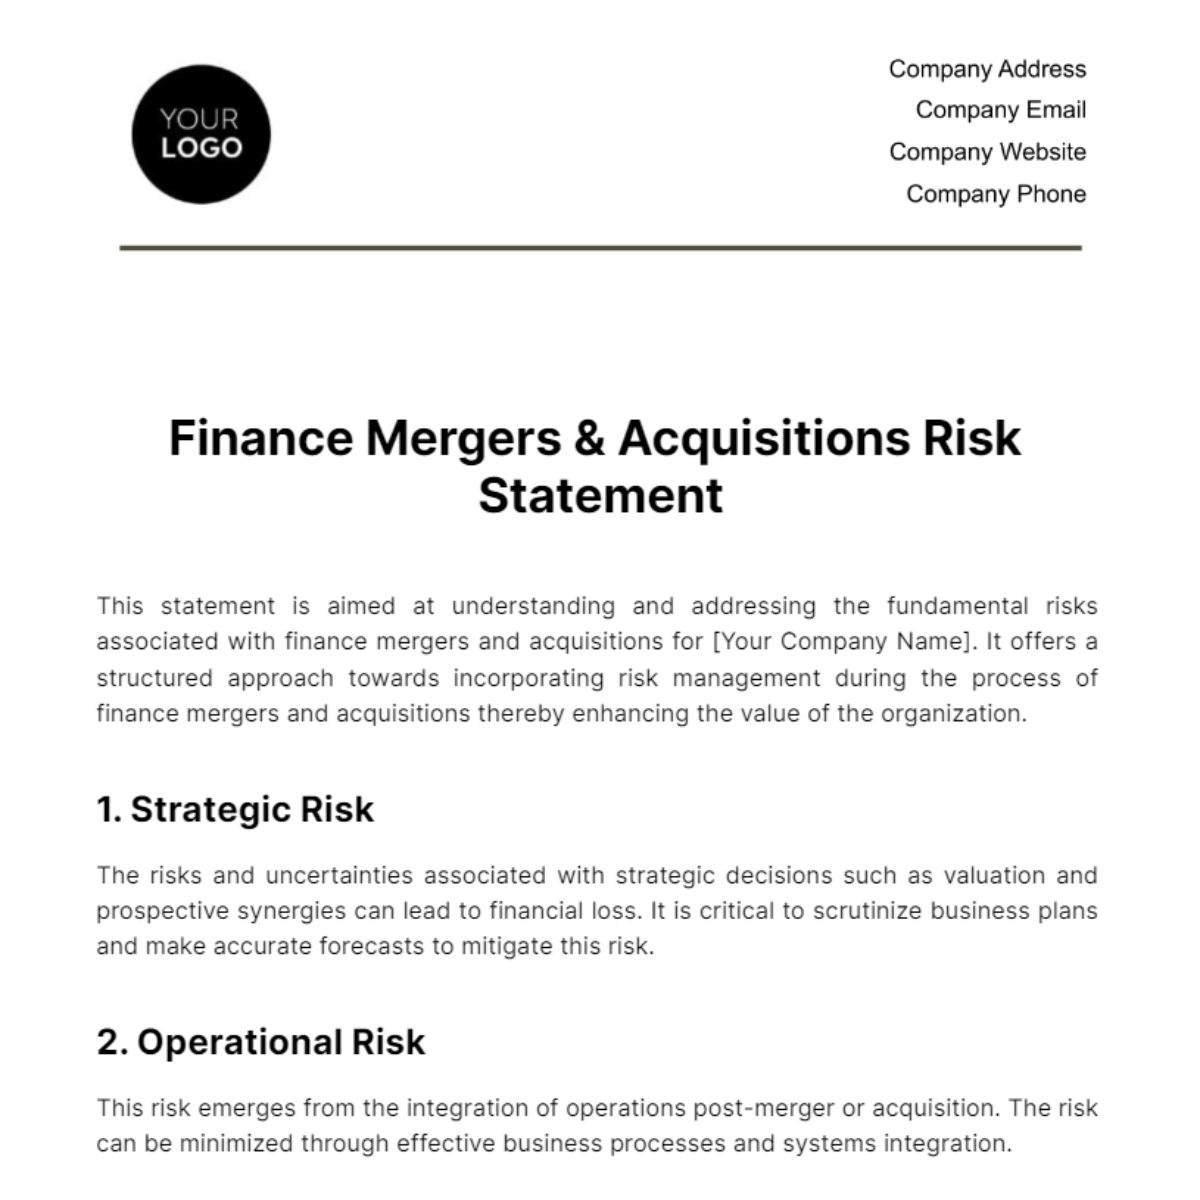 Free Finance Mergers & Acquisitions Risk Statement Template